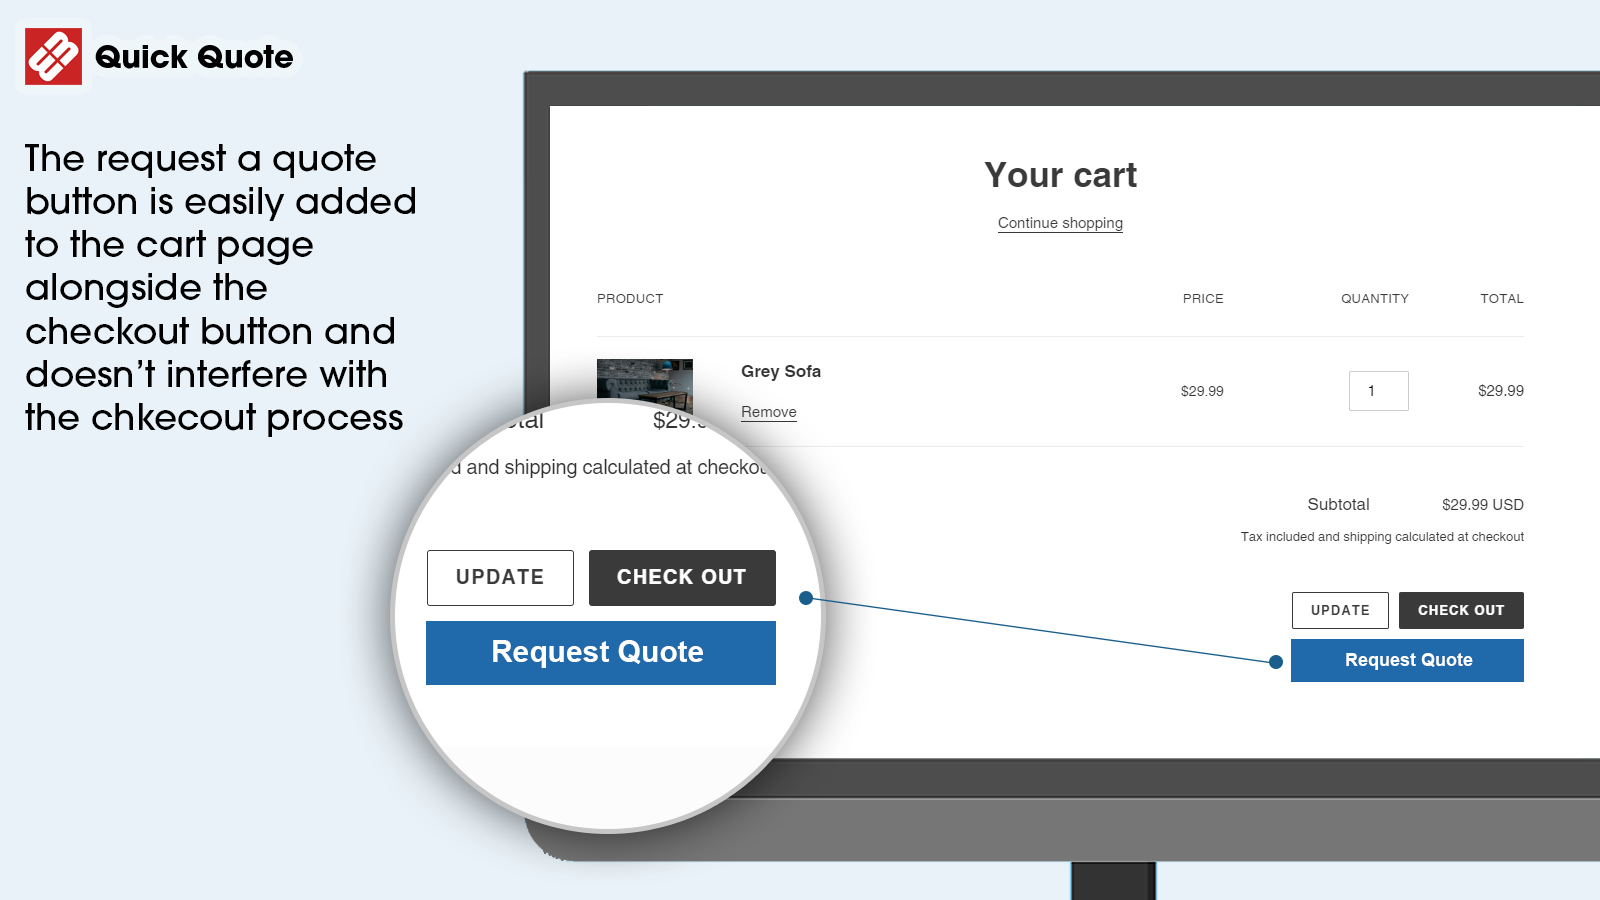 Quick Quote button in cart